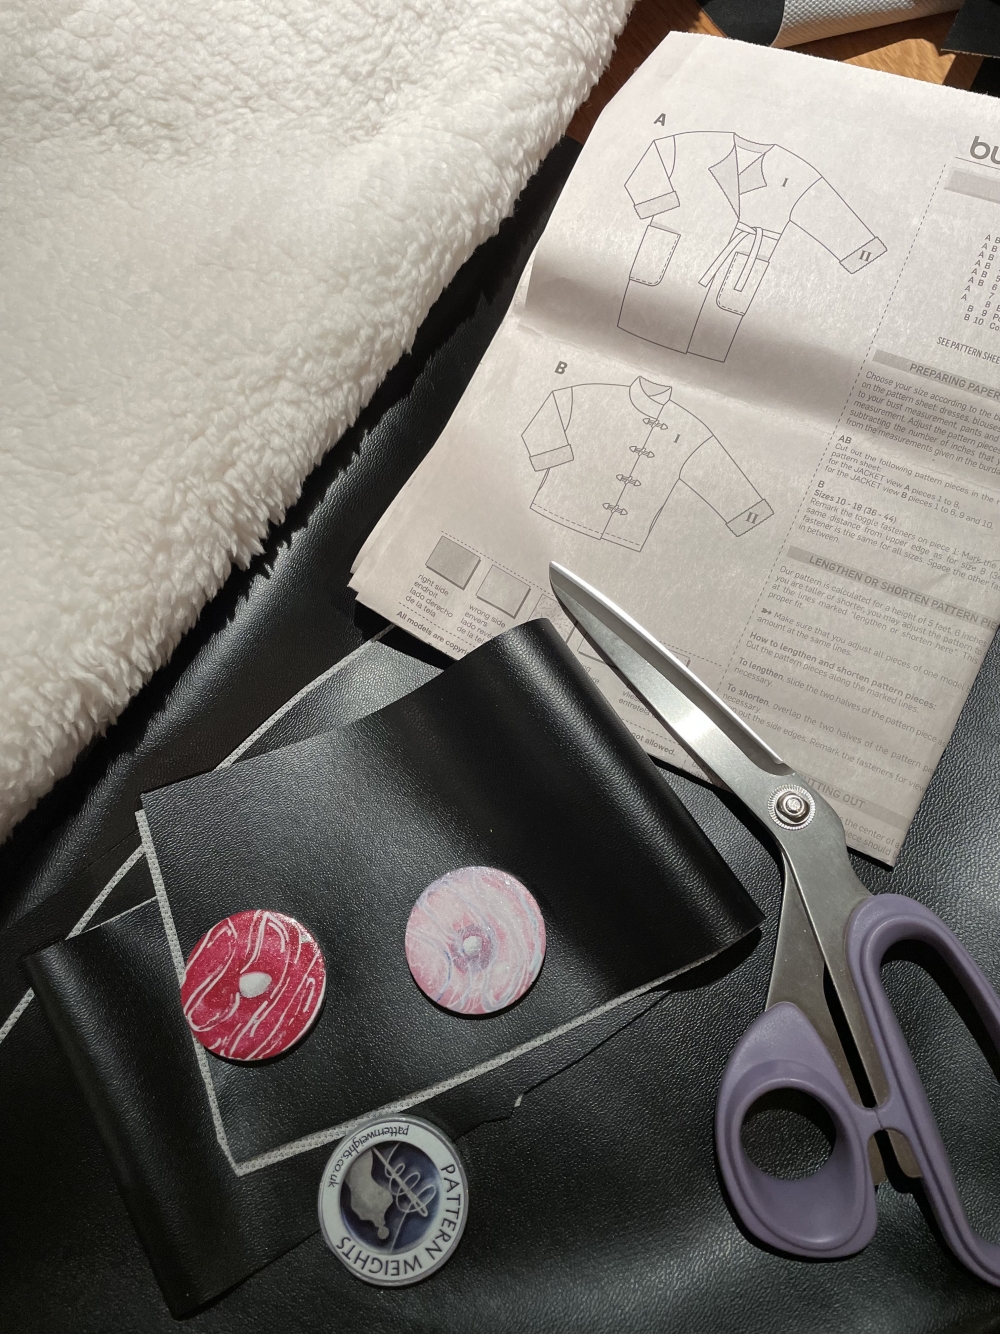 6 Methods For Sewing Zippers - The Creative Curator